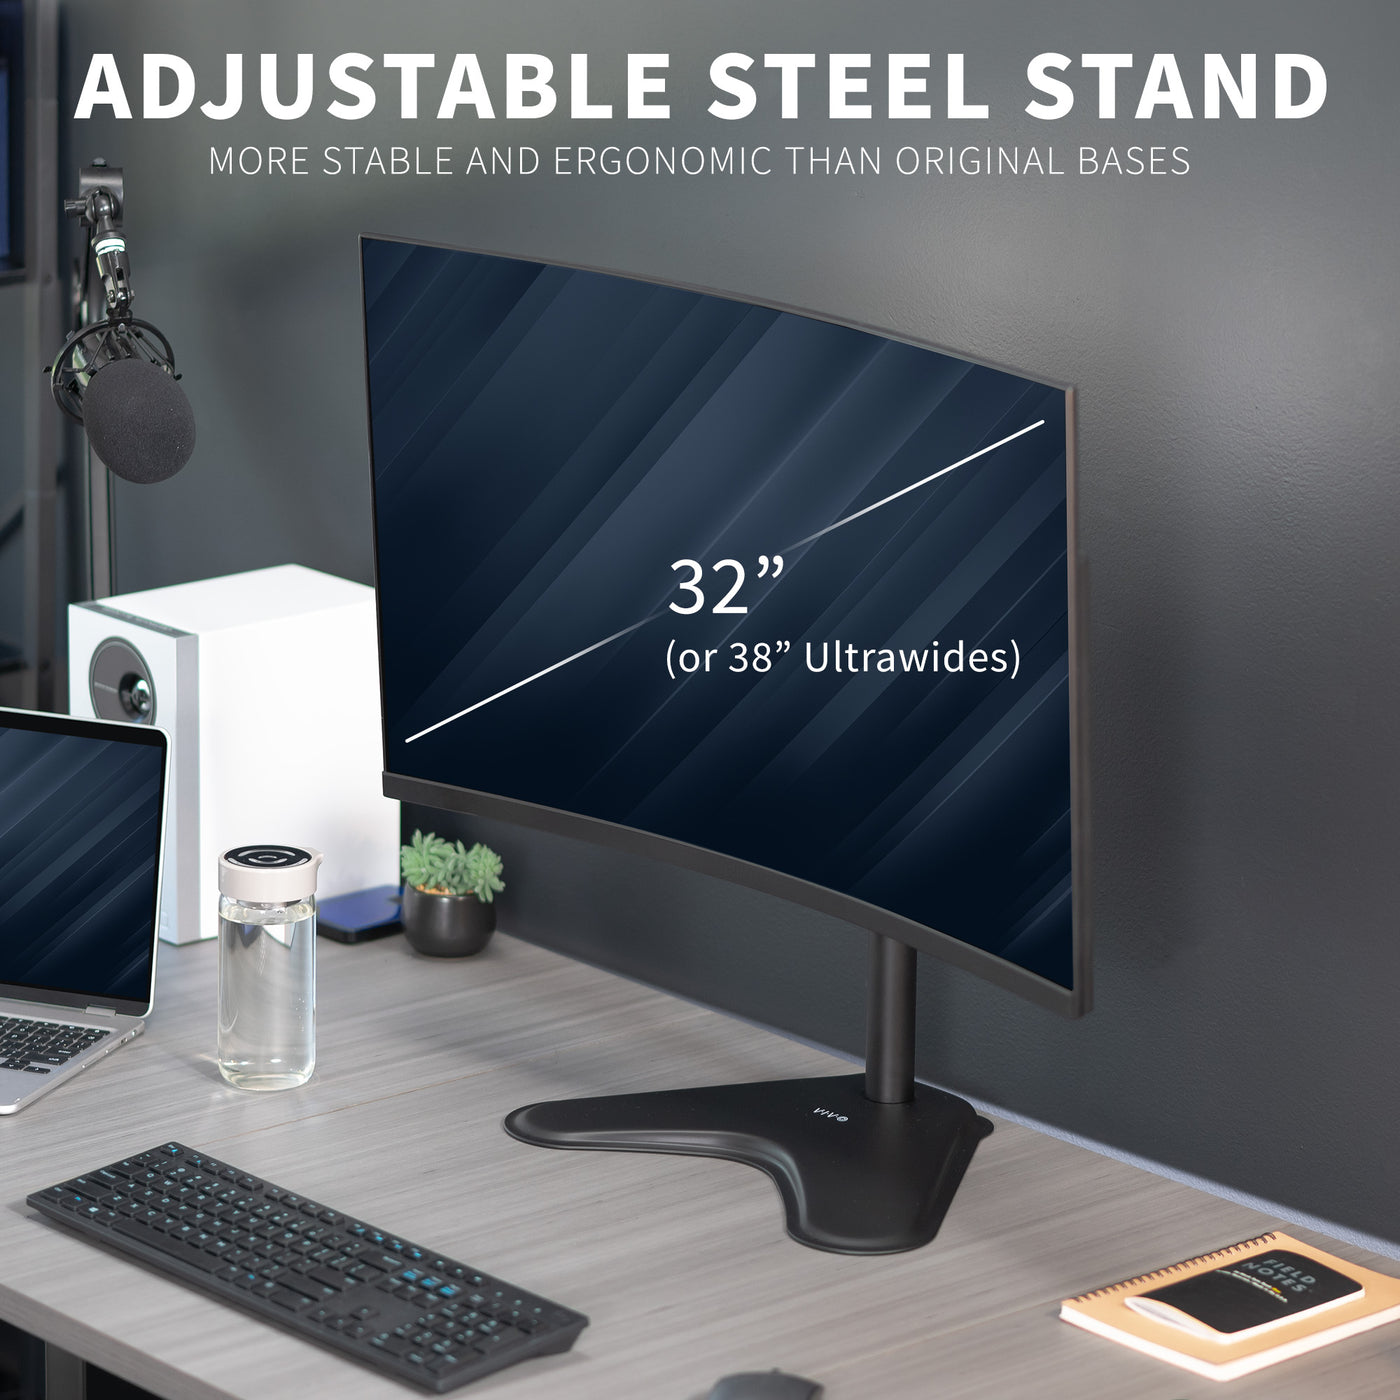 A height-adjustable monitor stands for better viewing.